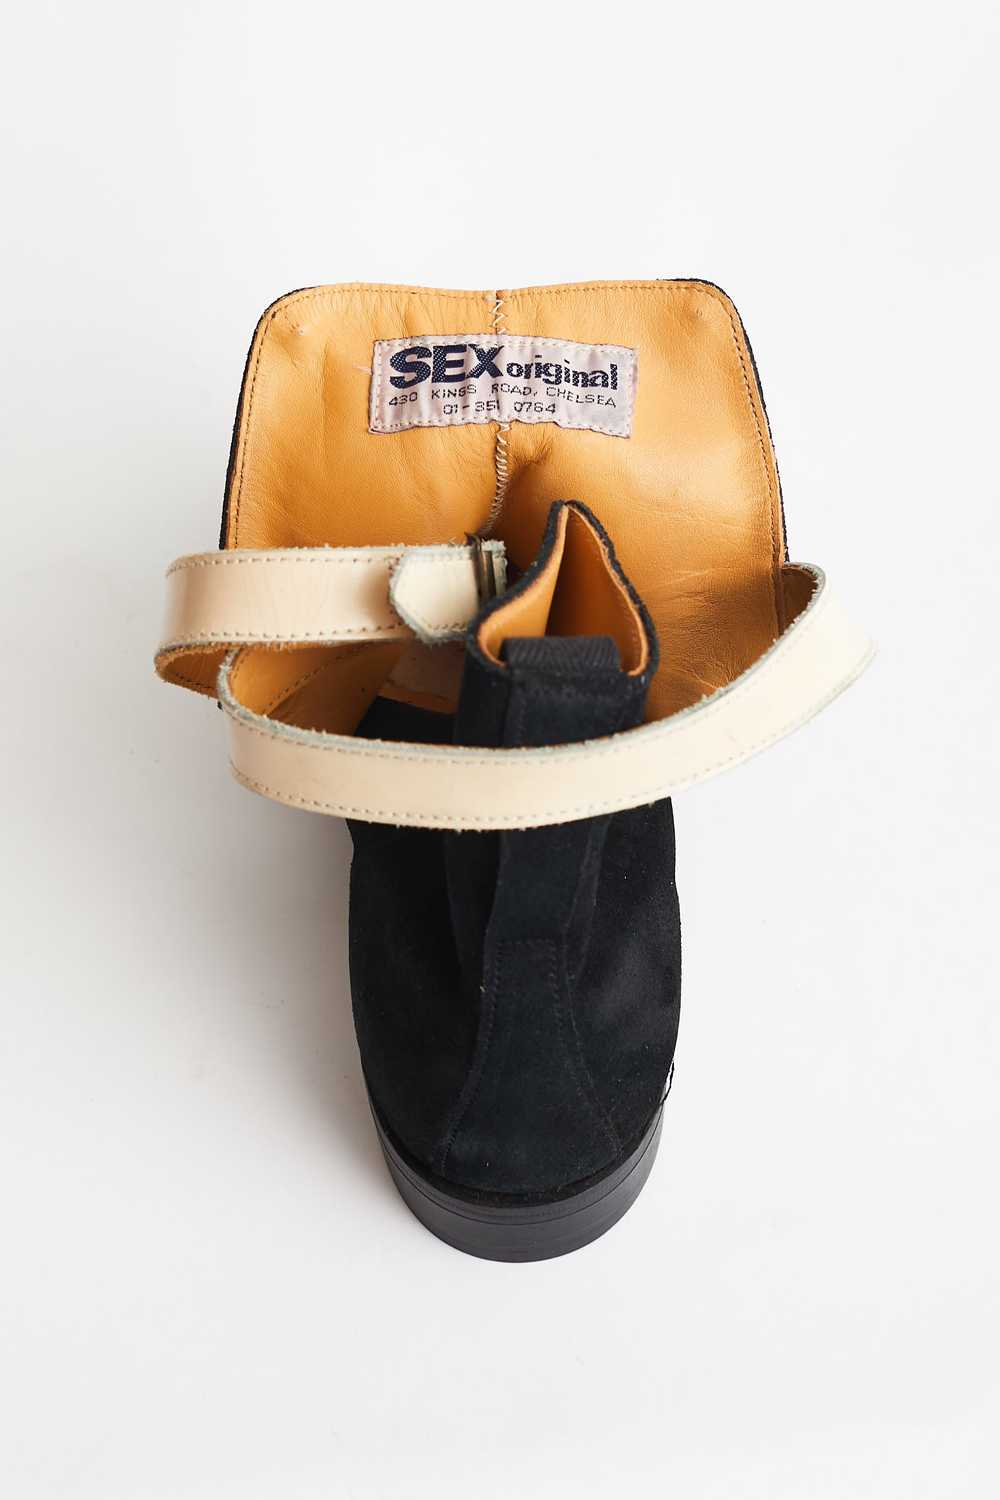 Vivienne Westwood 70's Sex suede Pirate boots - image 7